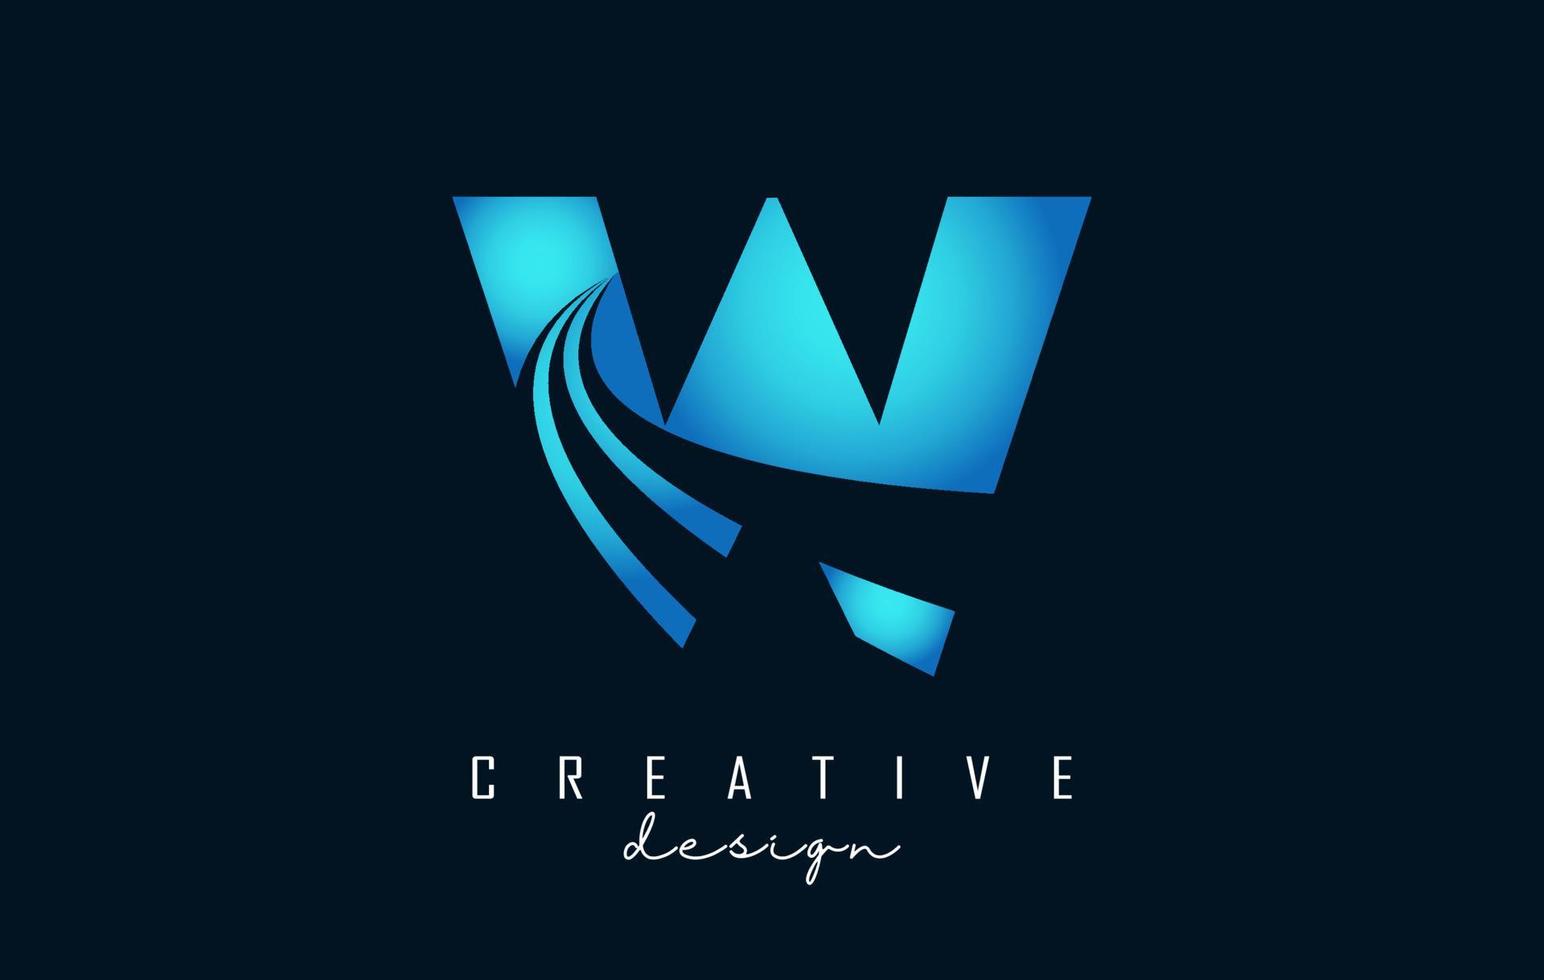 Creative letter W logo with leading lines and road concept design. Letter W with geometric design. vector